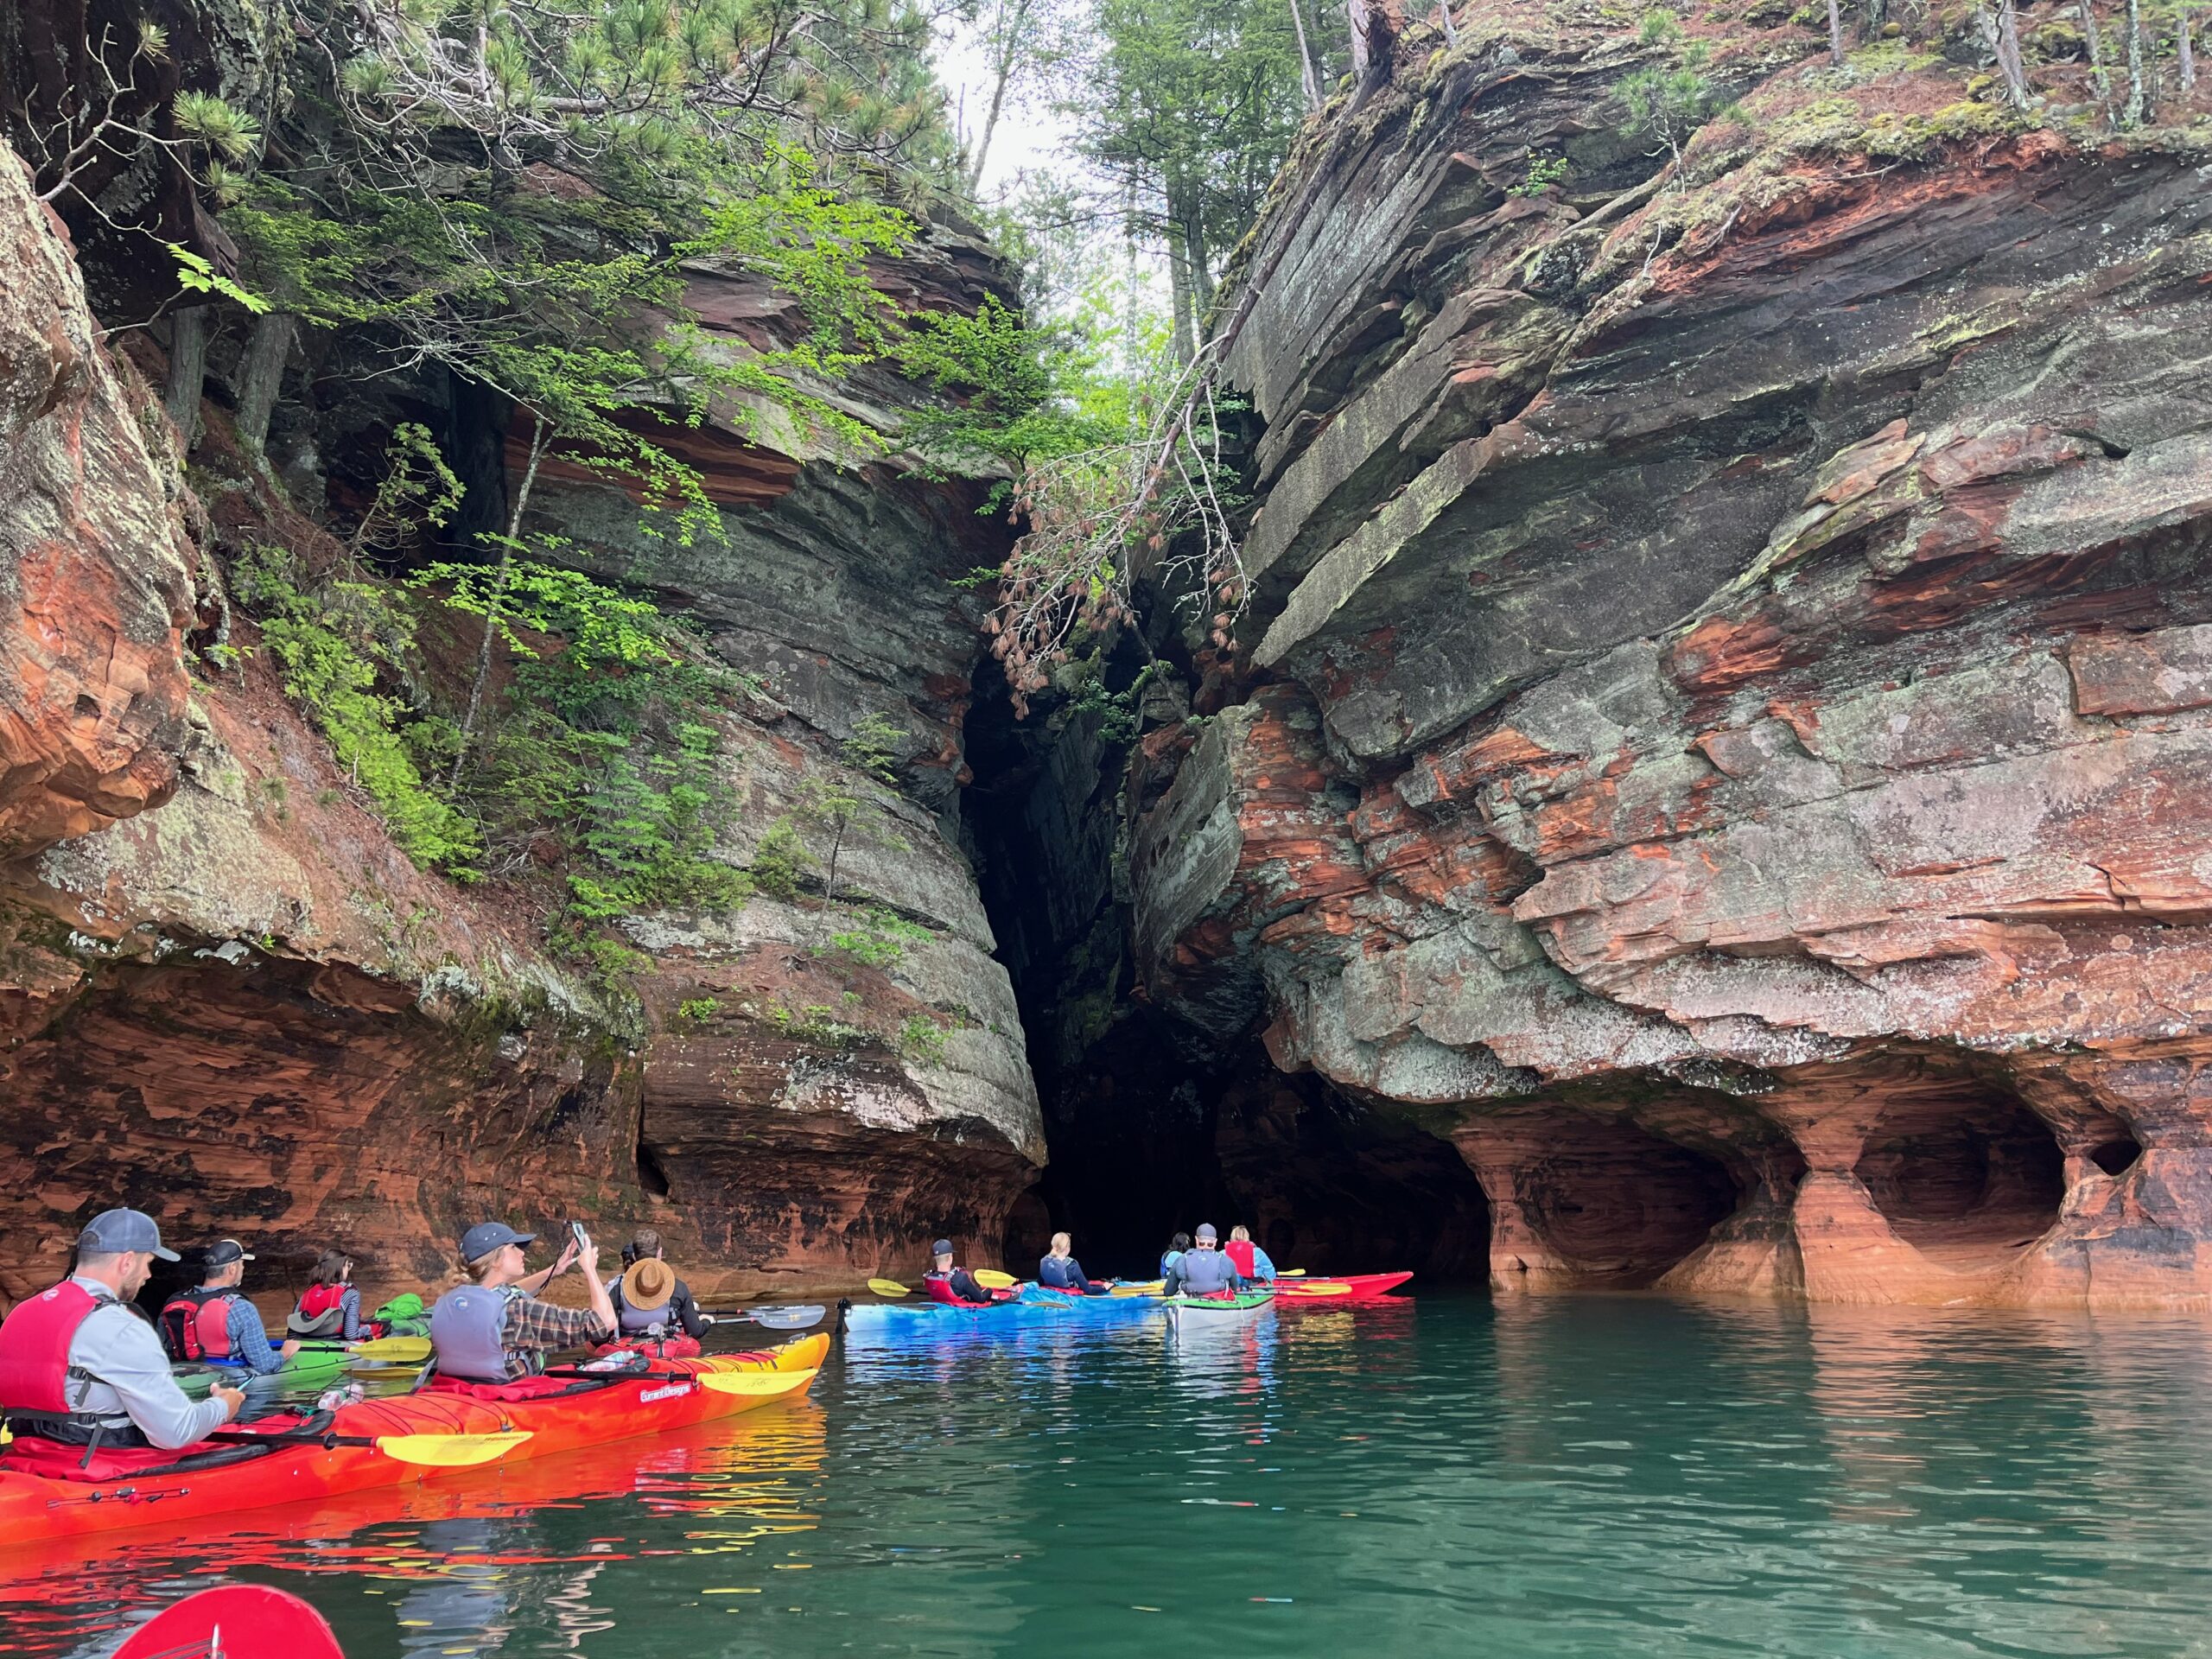 People kayaking next to large rock formations overhead